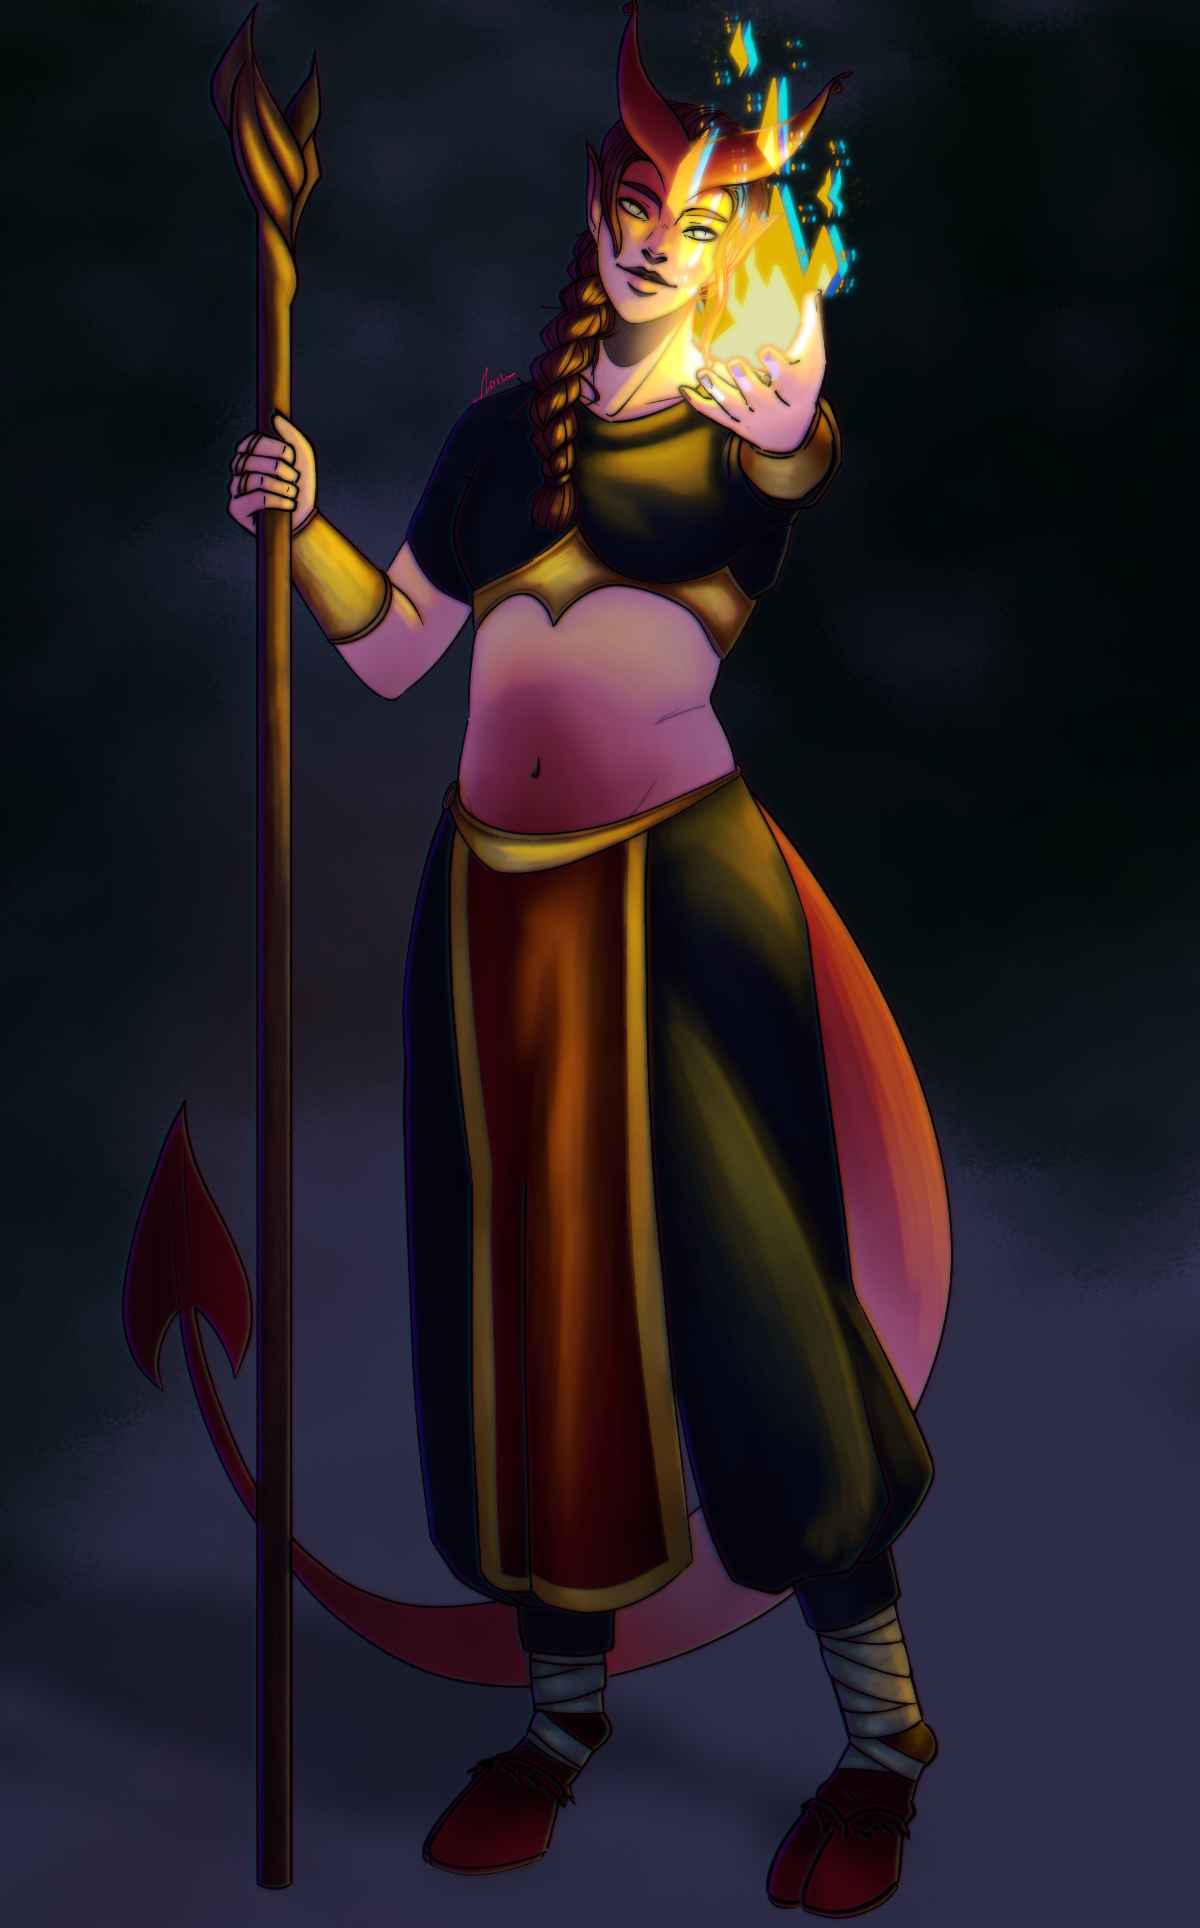 Digital painting of a tiefling woman in black and gold robes. She is smiling at the viewer, holding her hand out with a magical flame bursting from it.